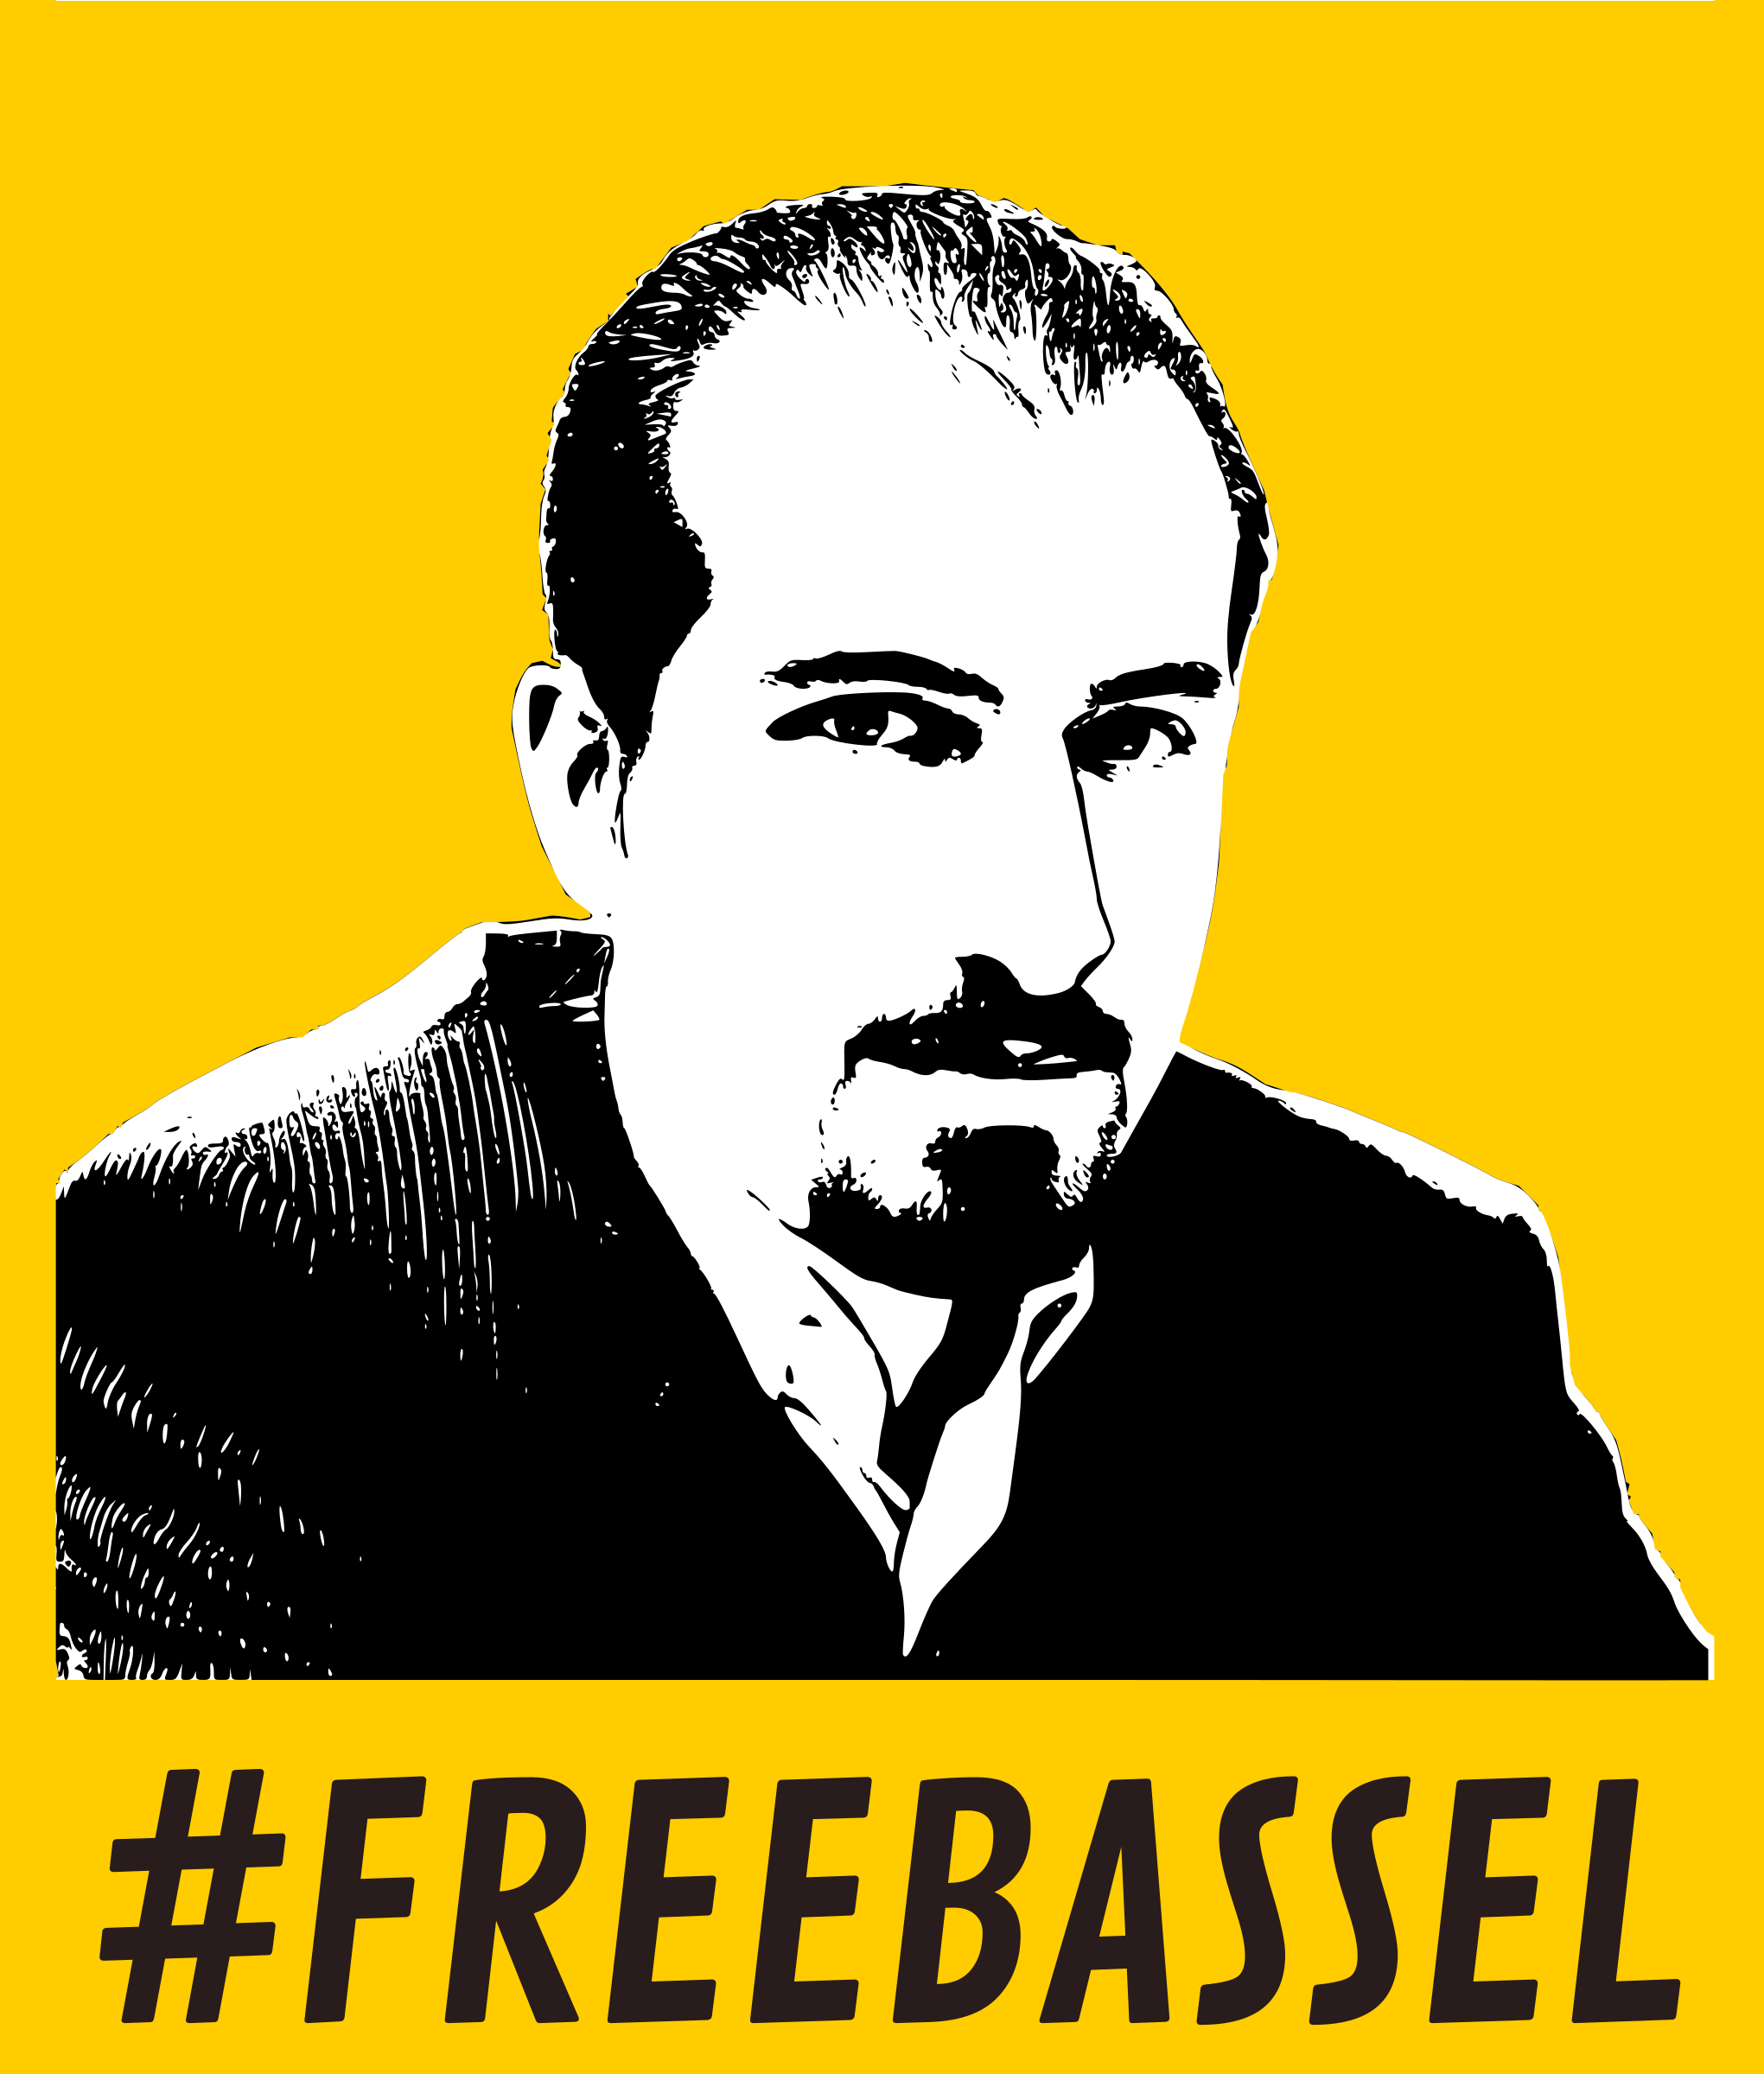 Freebassel yellow big image. Color clipart poster